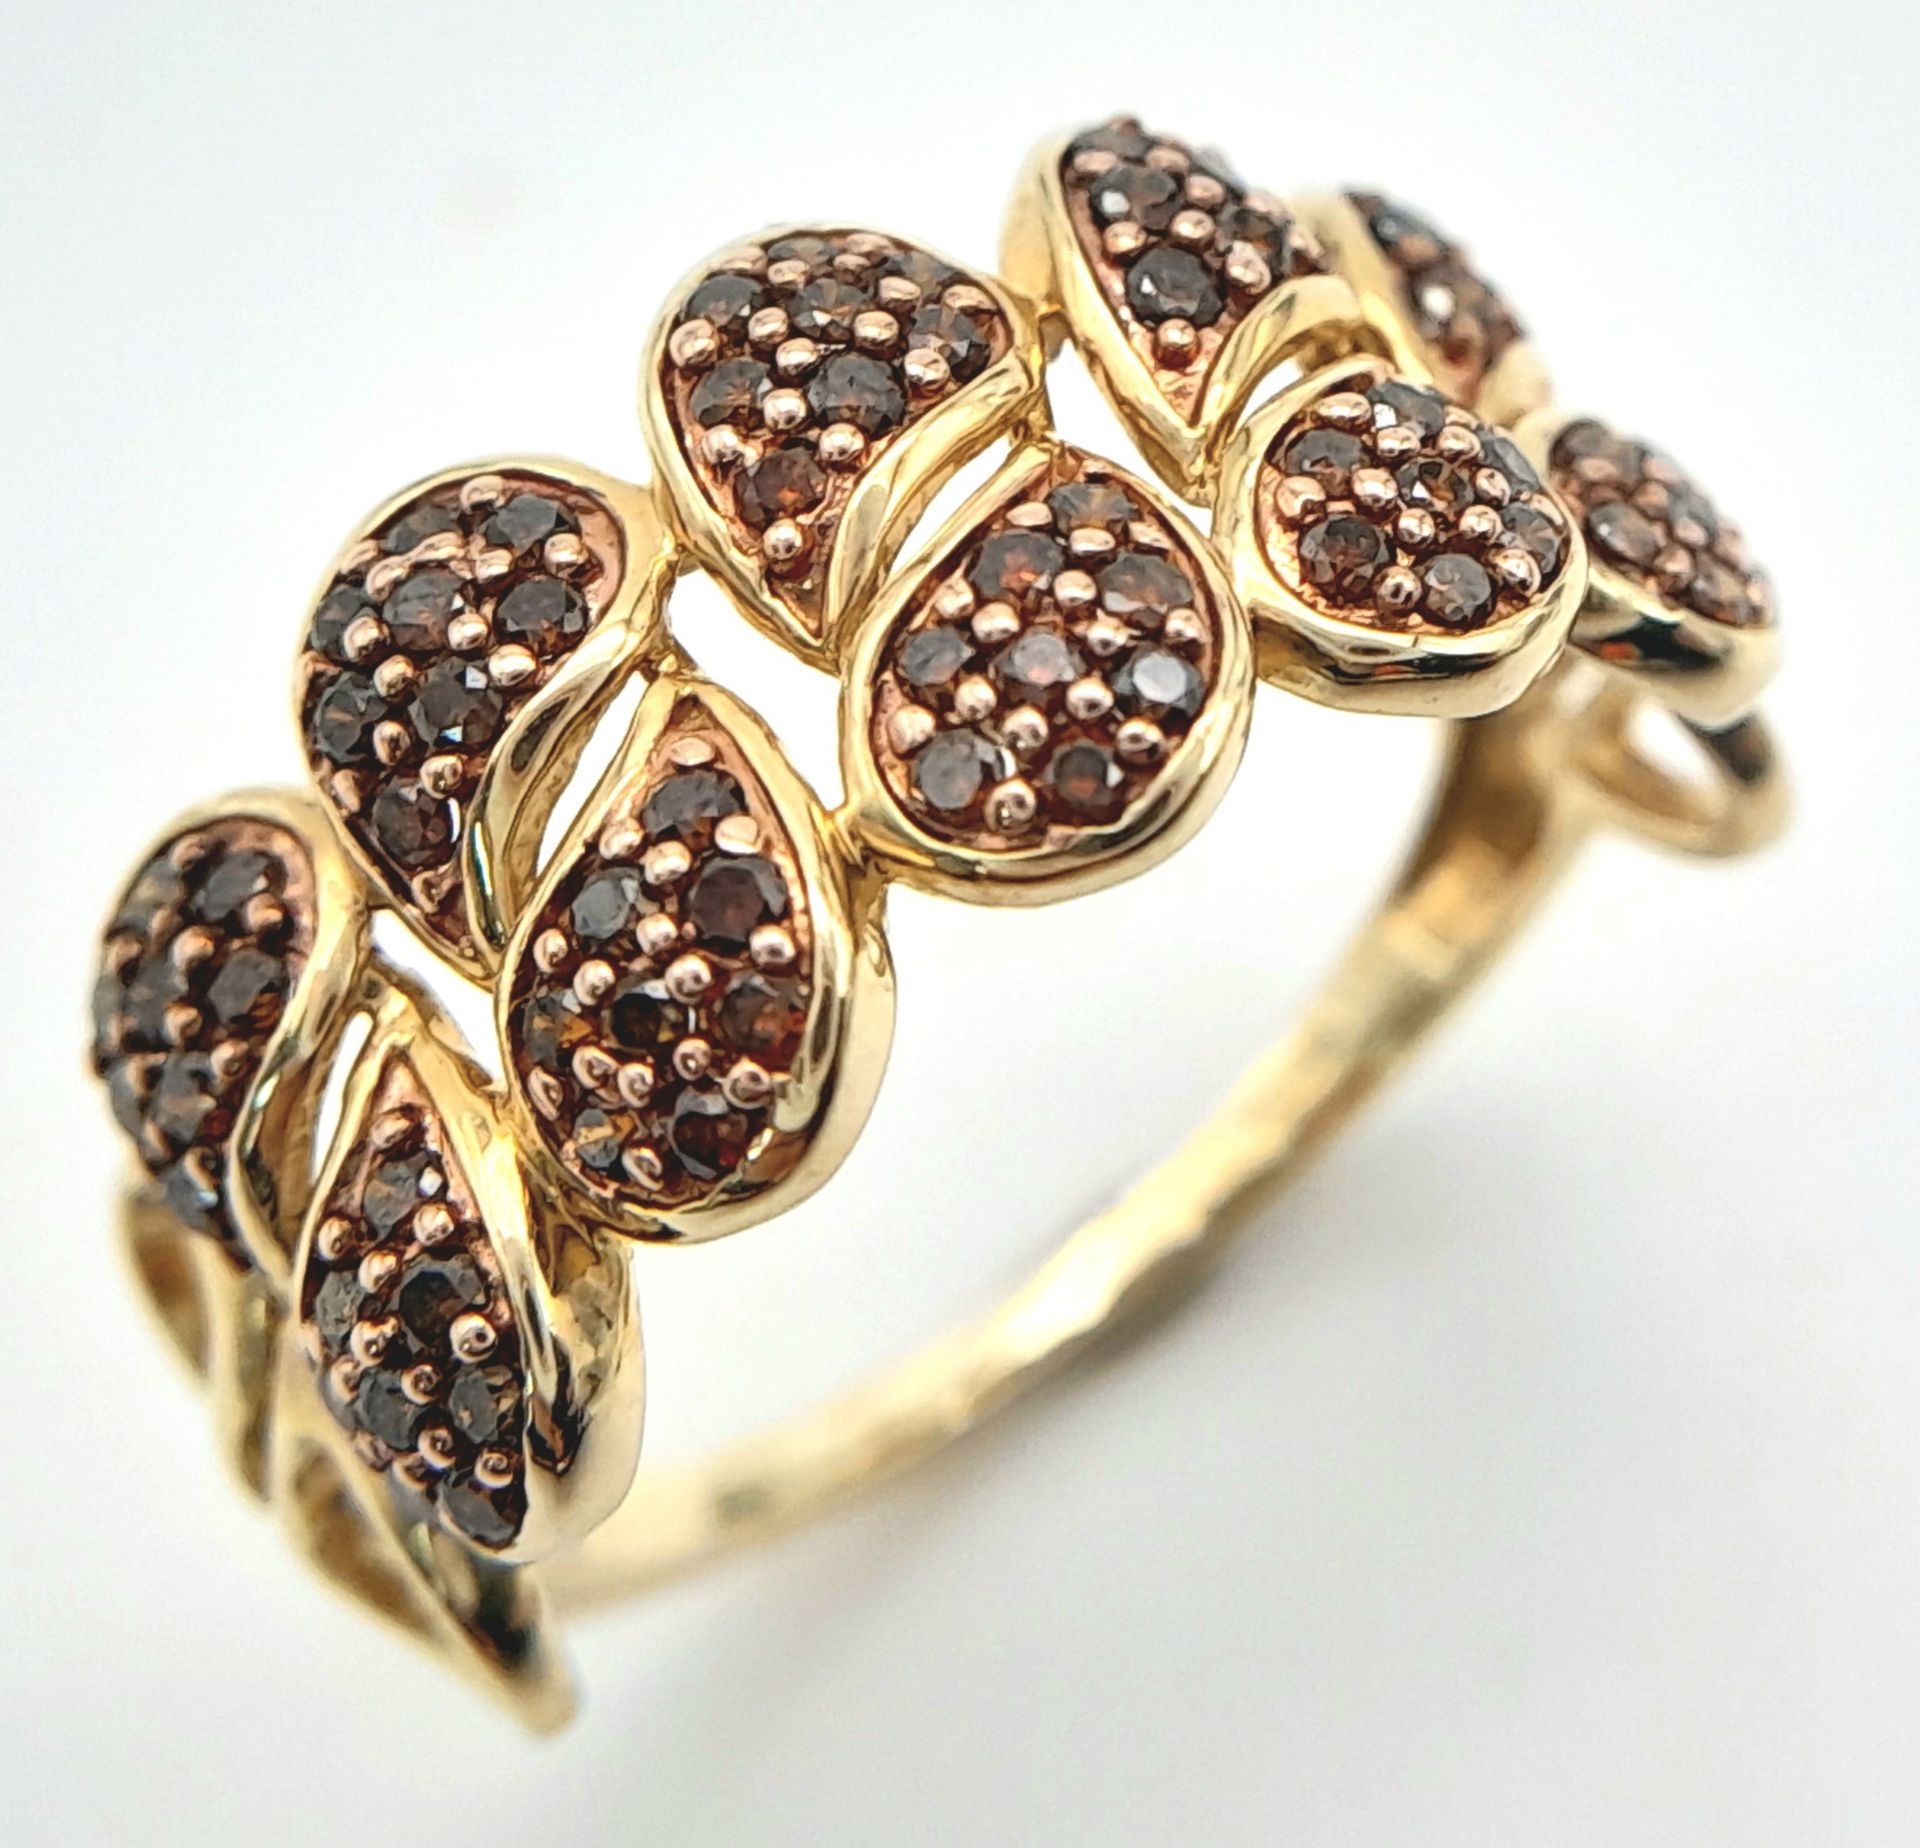 A 9K YELLOW GOLD COLOURED DIAMOND SET RING. 0.80ctw, Size N, 2.2g total weight. Ref: SC 8036